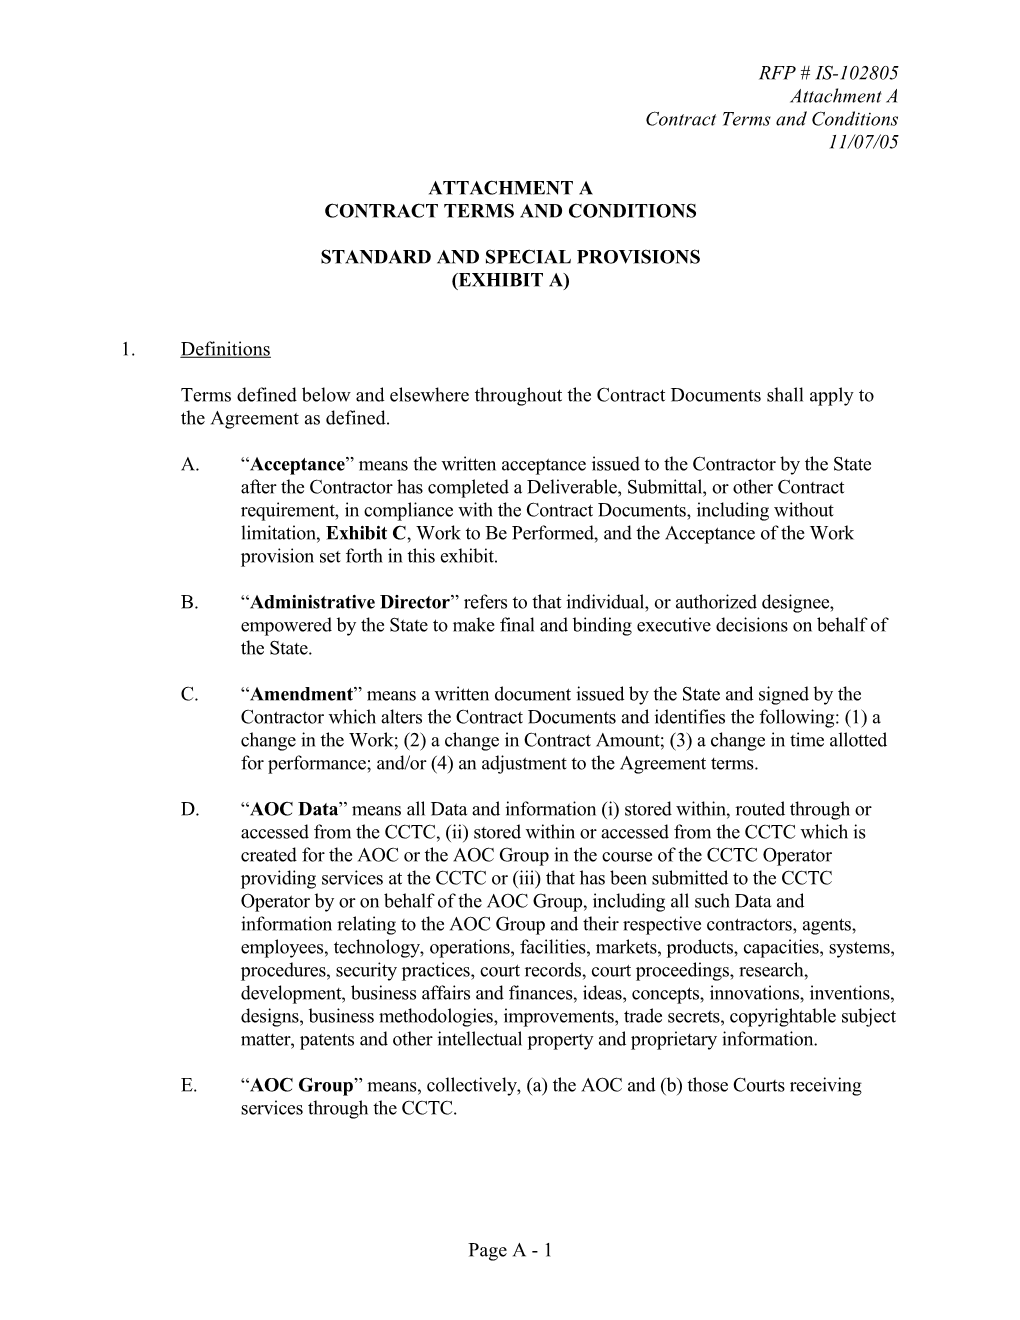 Contract Terms and Conditions s1